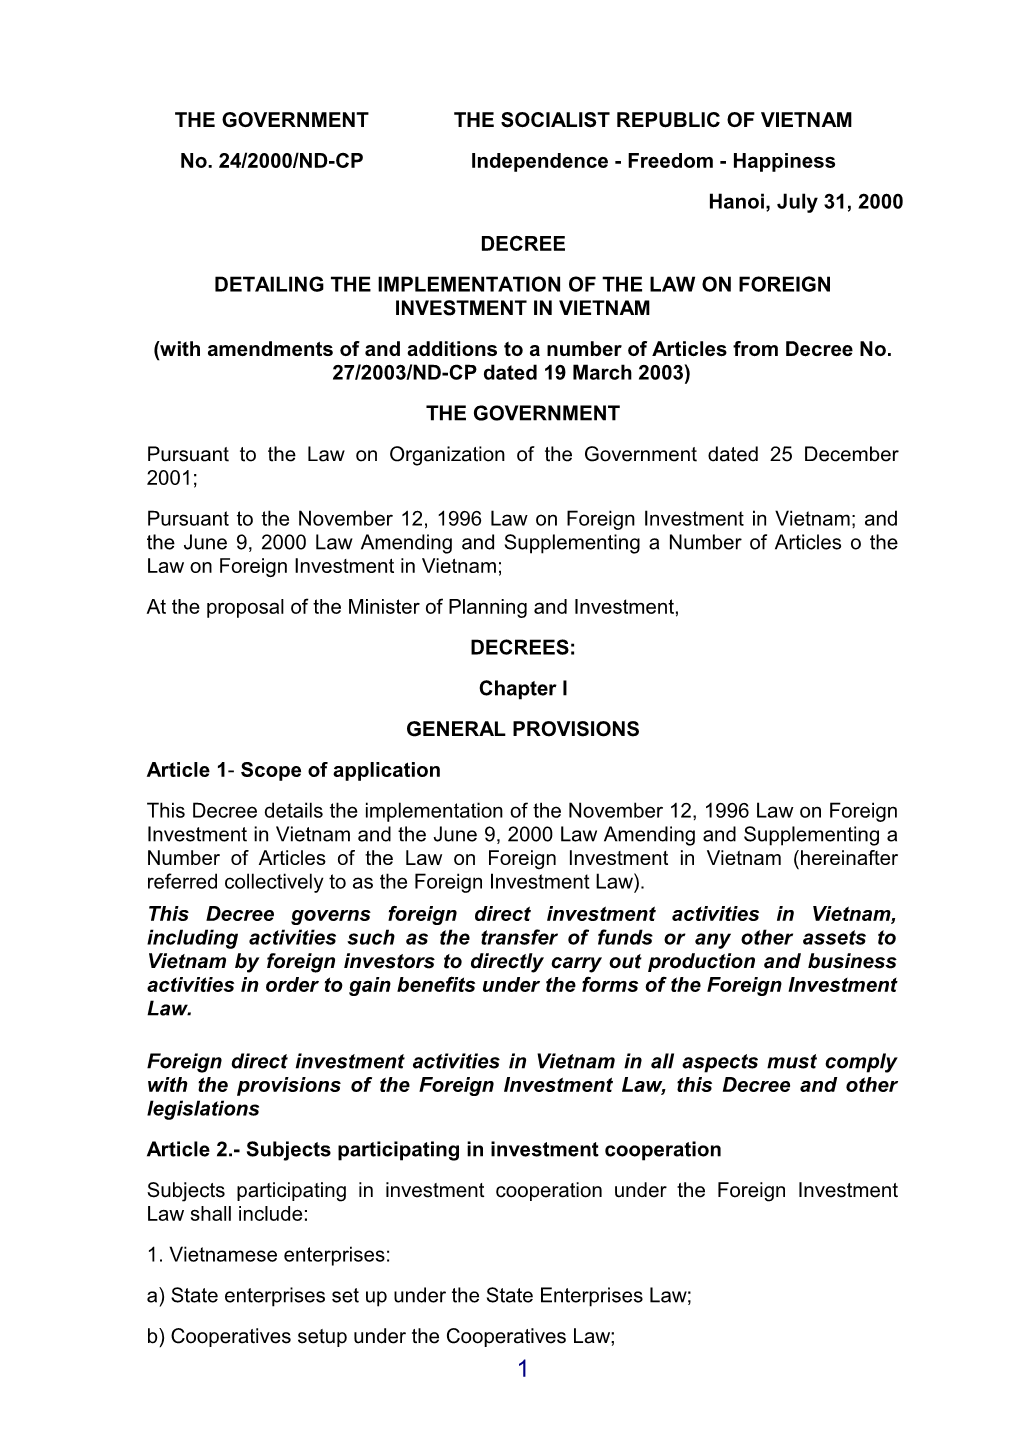 Detailing the Implementation of the Law on Foreign Investment in Vietnam